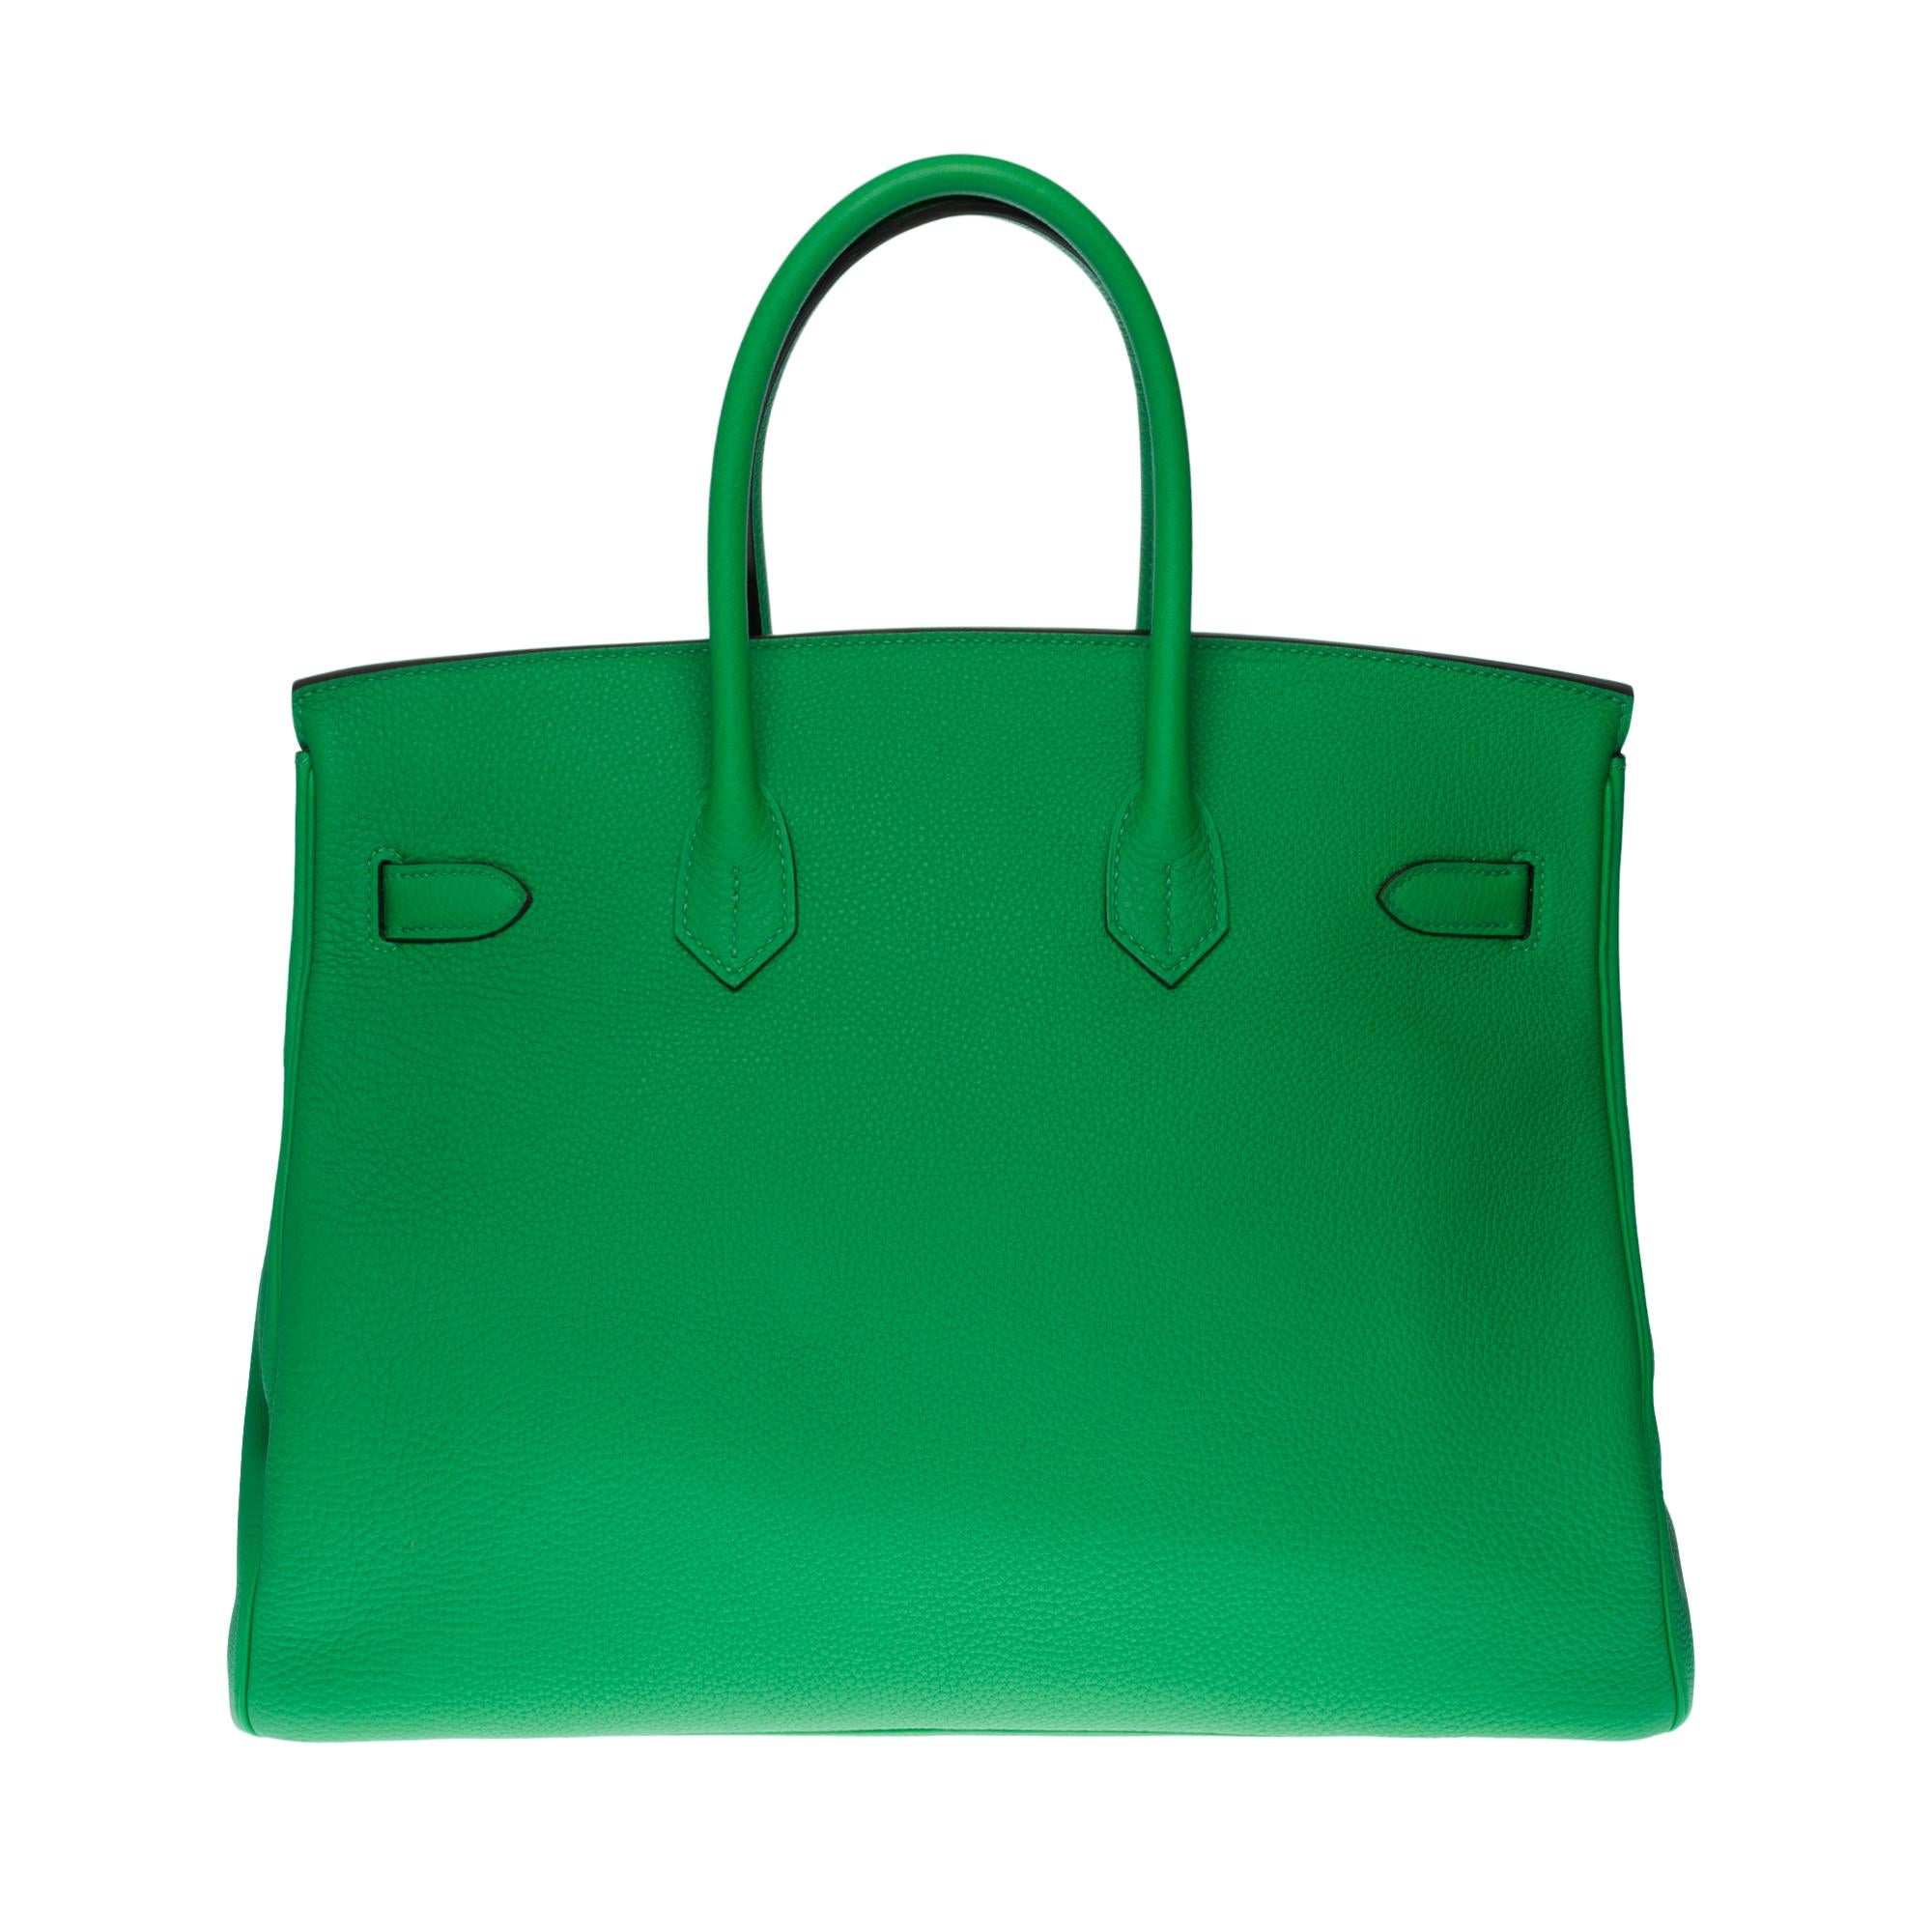 Superb and very Sought-after Hermes Birkin 35 cm Togo Green Bamboo leather handbag, palladium silver metal hardware, double green leather handle allowing a handheld

Flap closure
Lining in green leather, one zip pocket, one patch pocket
Signature: